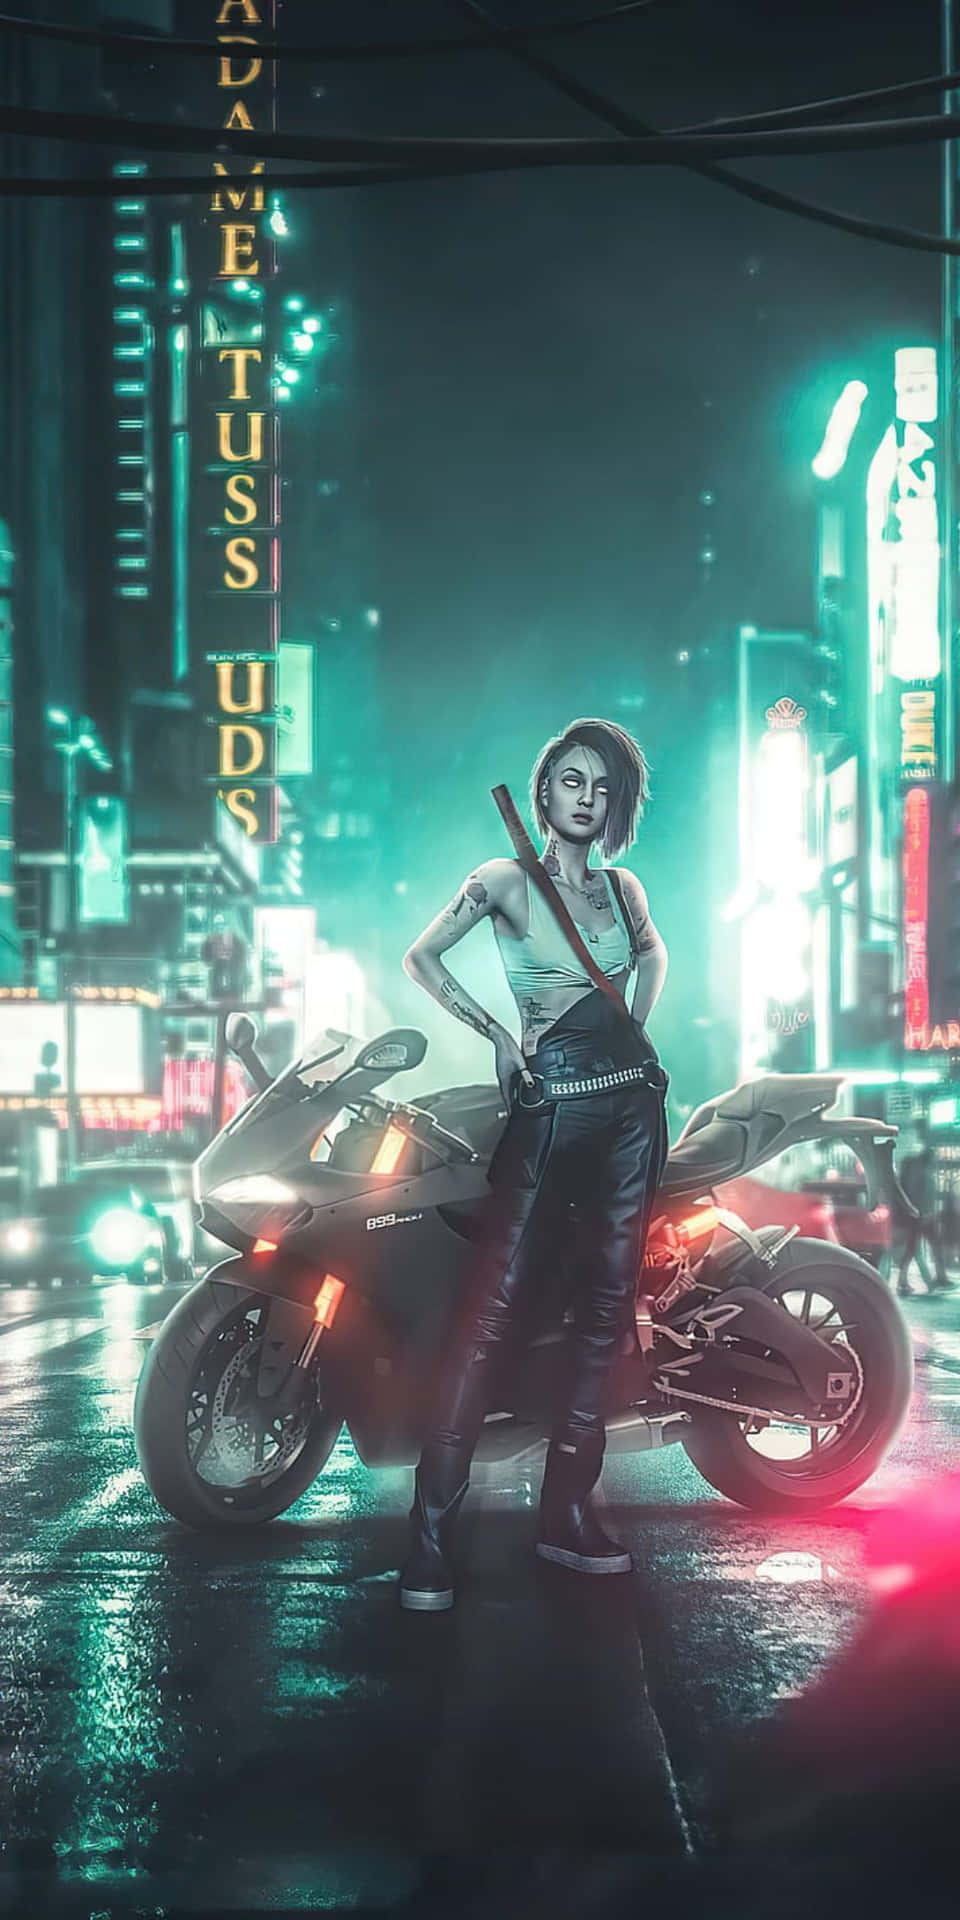 Cyberpunk ready - Suit up with the Pixel 3 and enter the world of cyberpunk